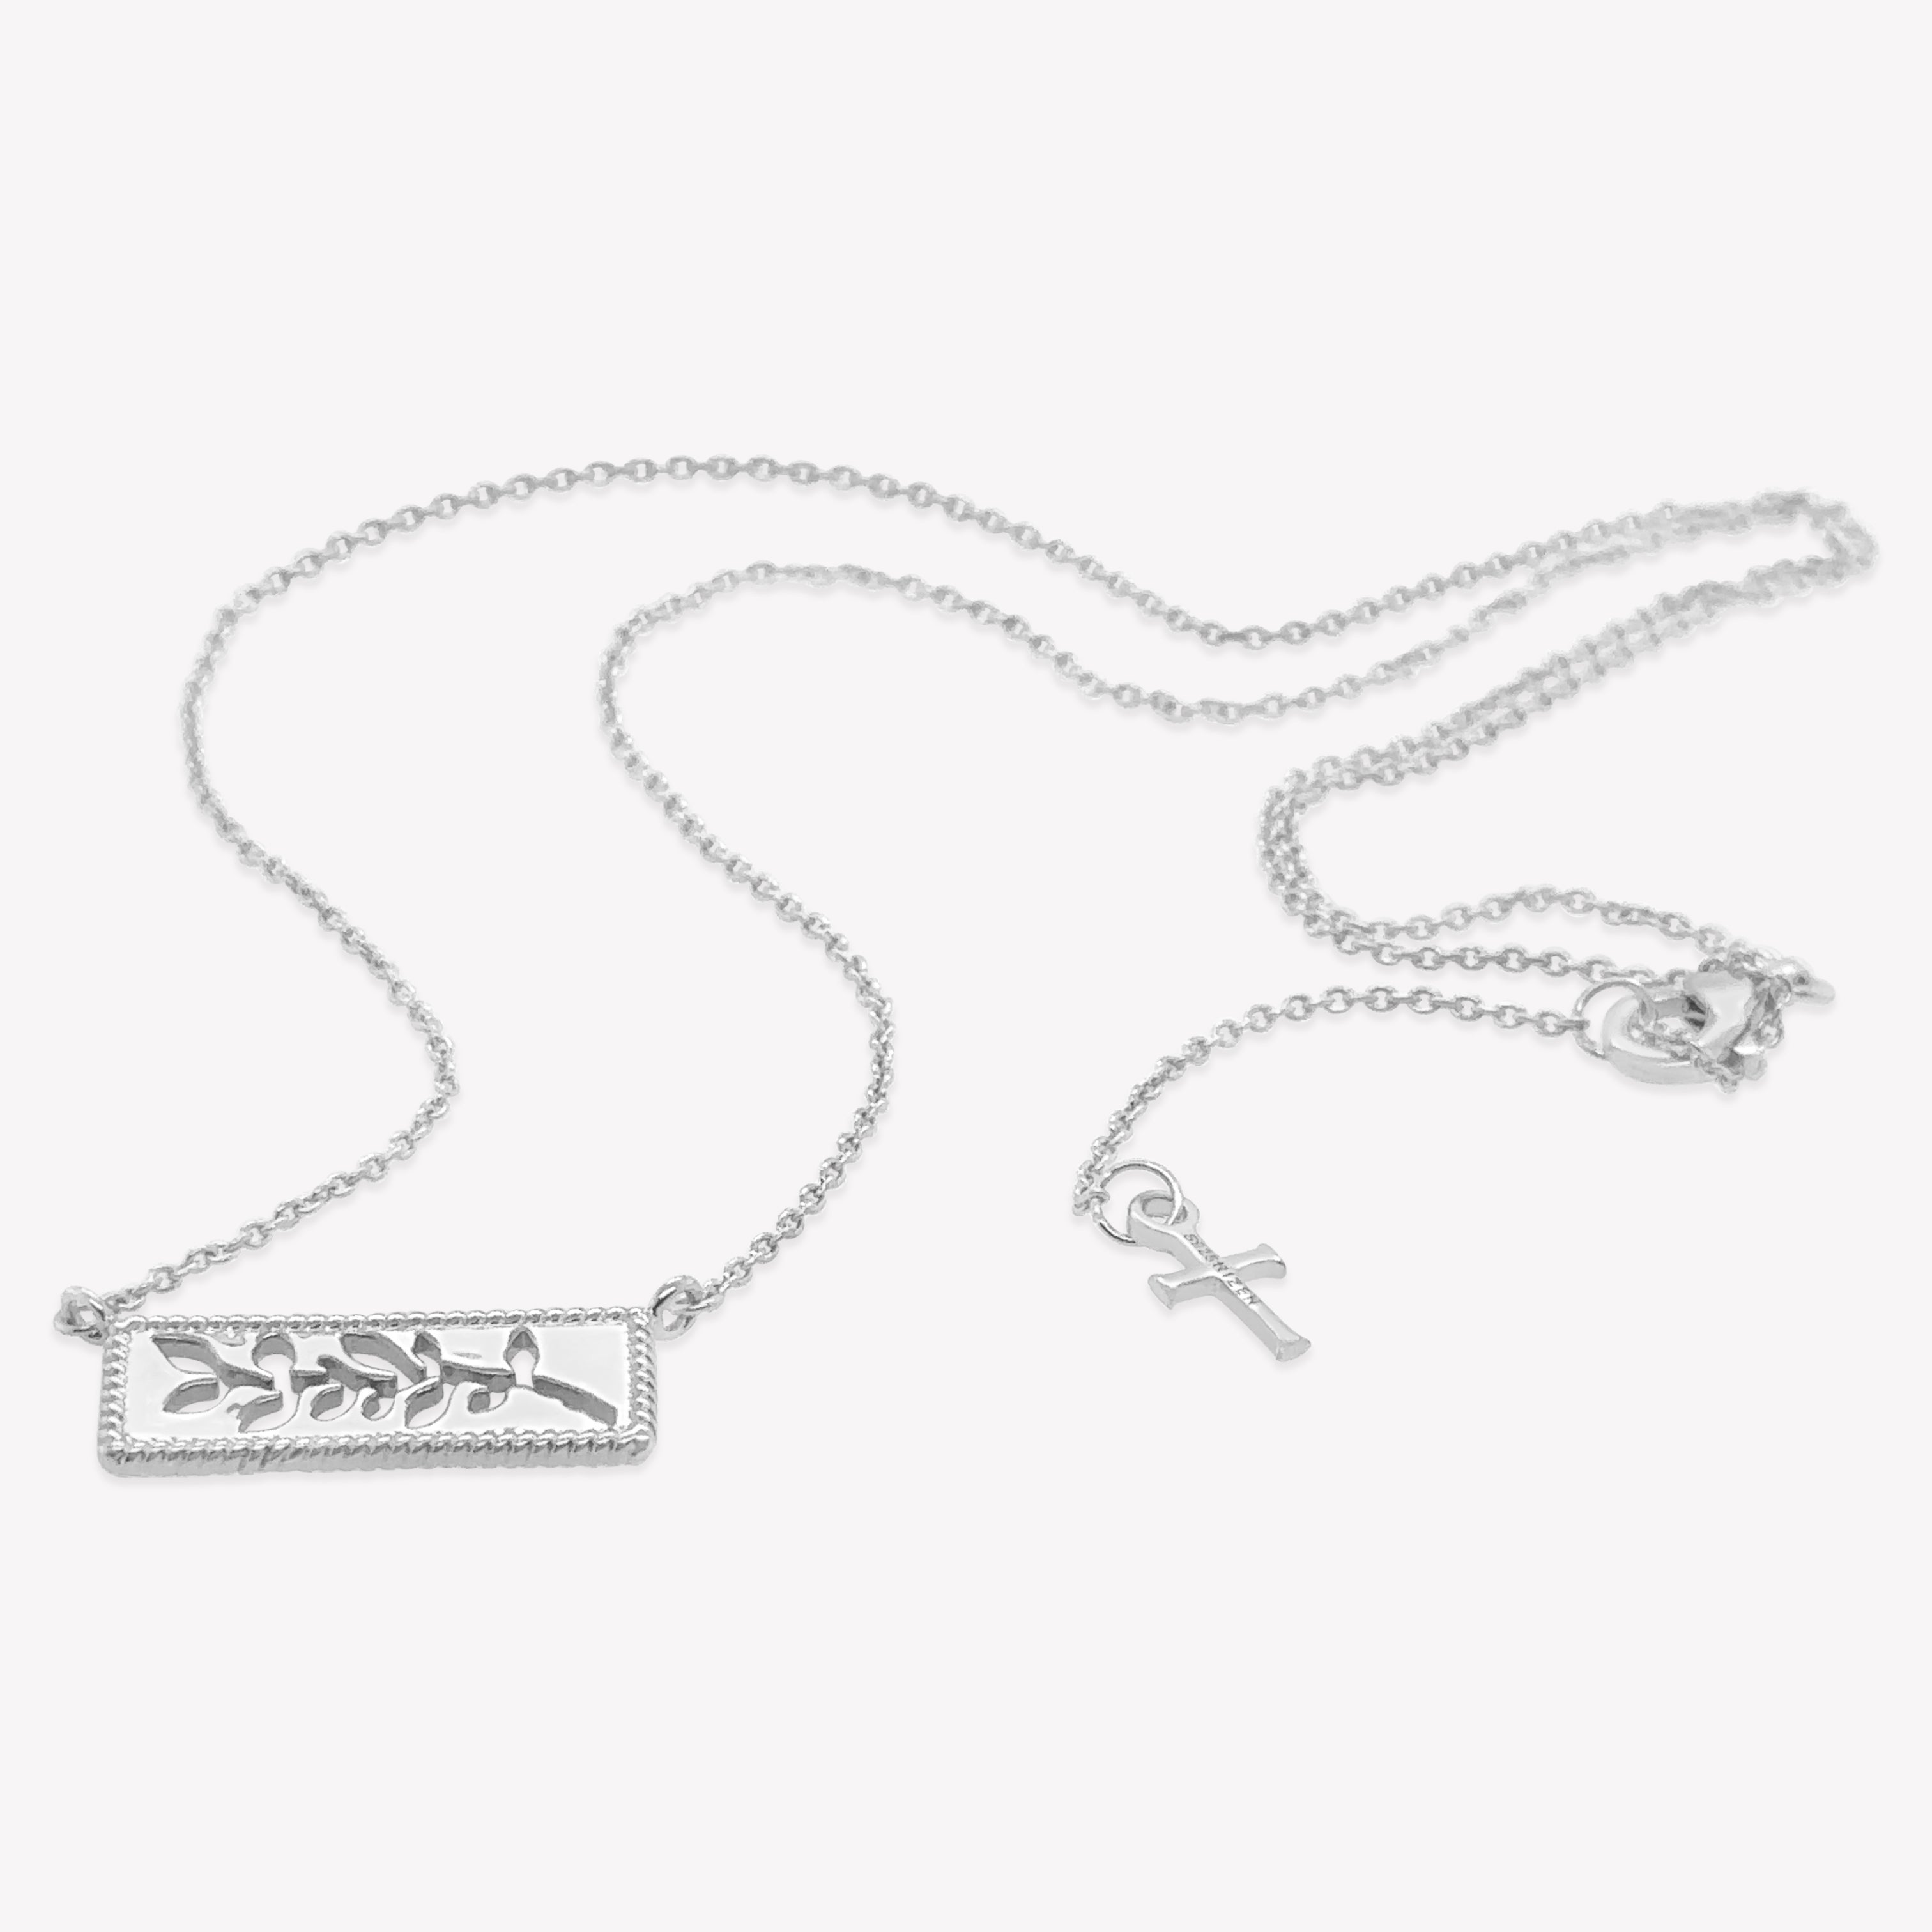 Intricately designed sterling silver Olive Branch Necklace from the Rooted Collection by Rizen Jewelry.